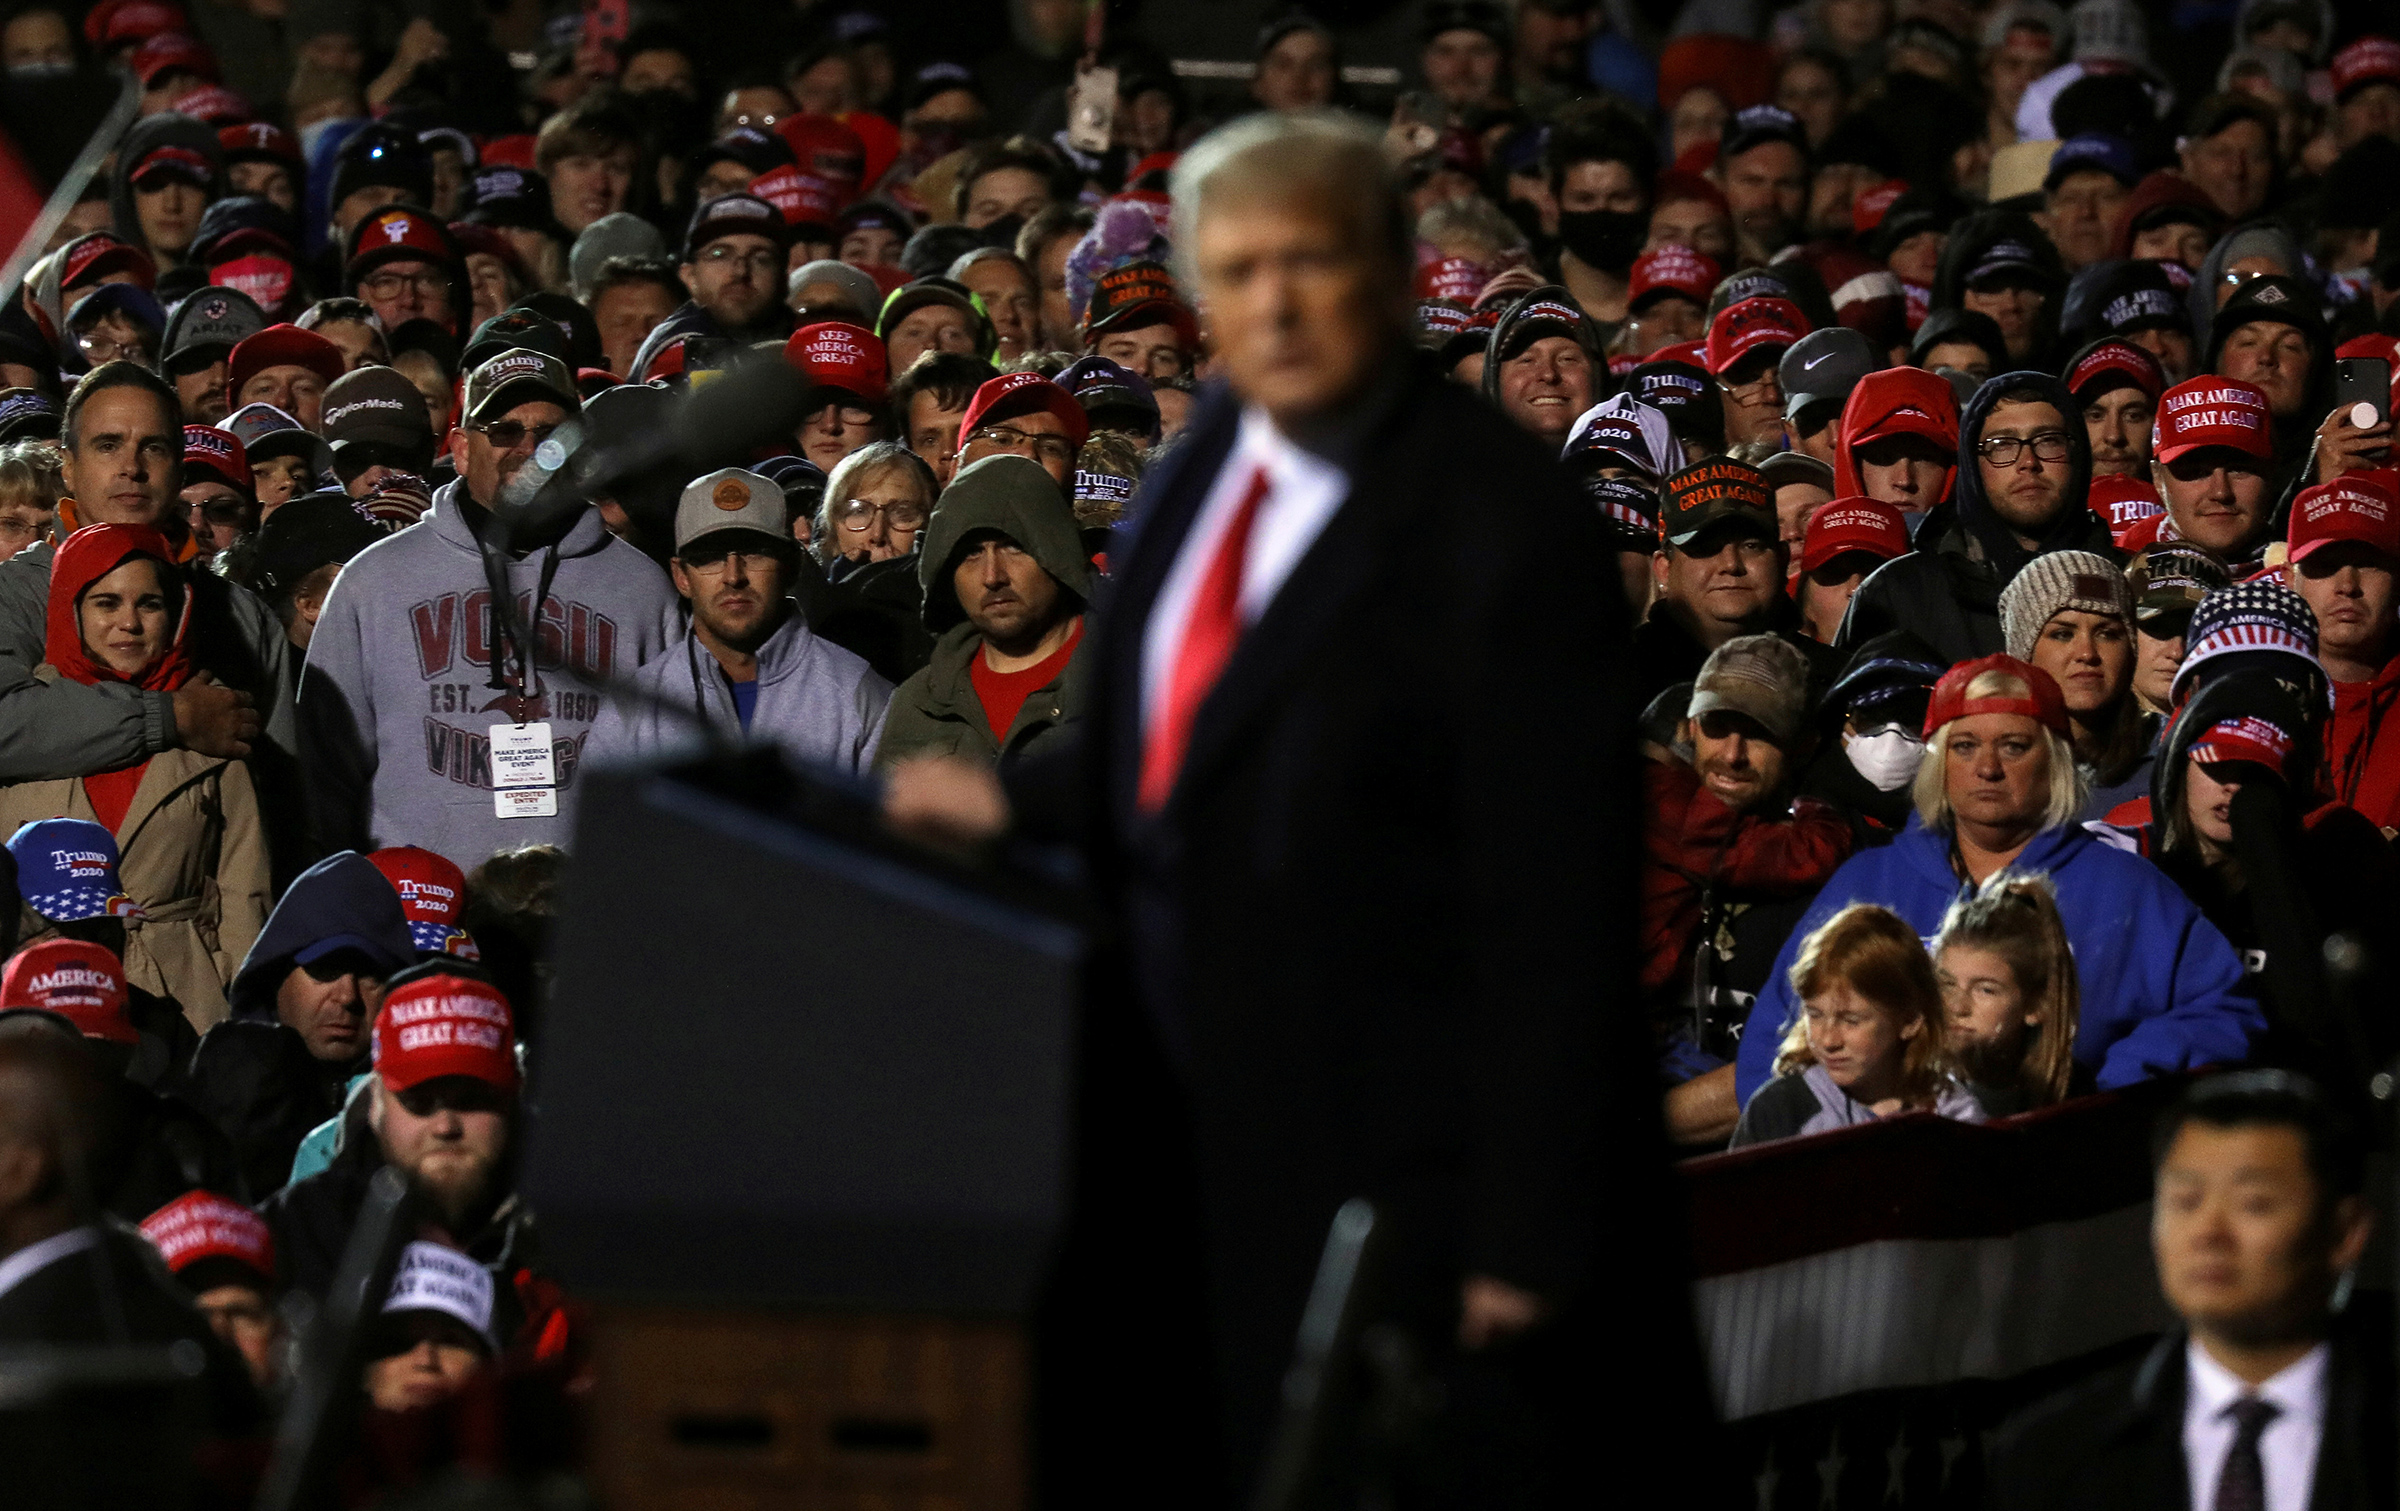 Supporters of President Donald Trump look on as he speaks during a campaign rally at Duluth International Airport on Sept. 30, 2020. (Leah Millis—Reuters)